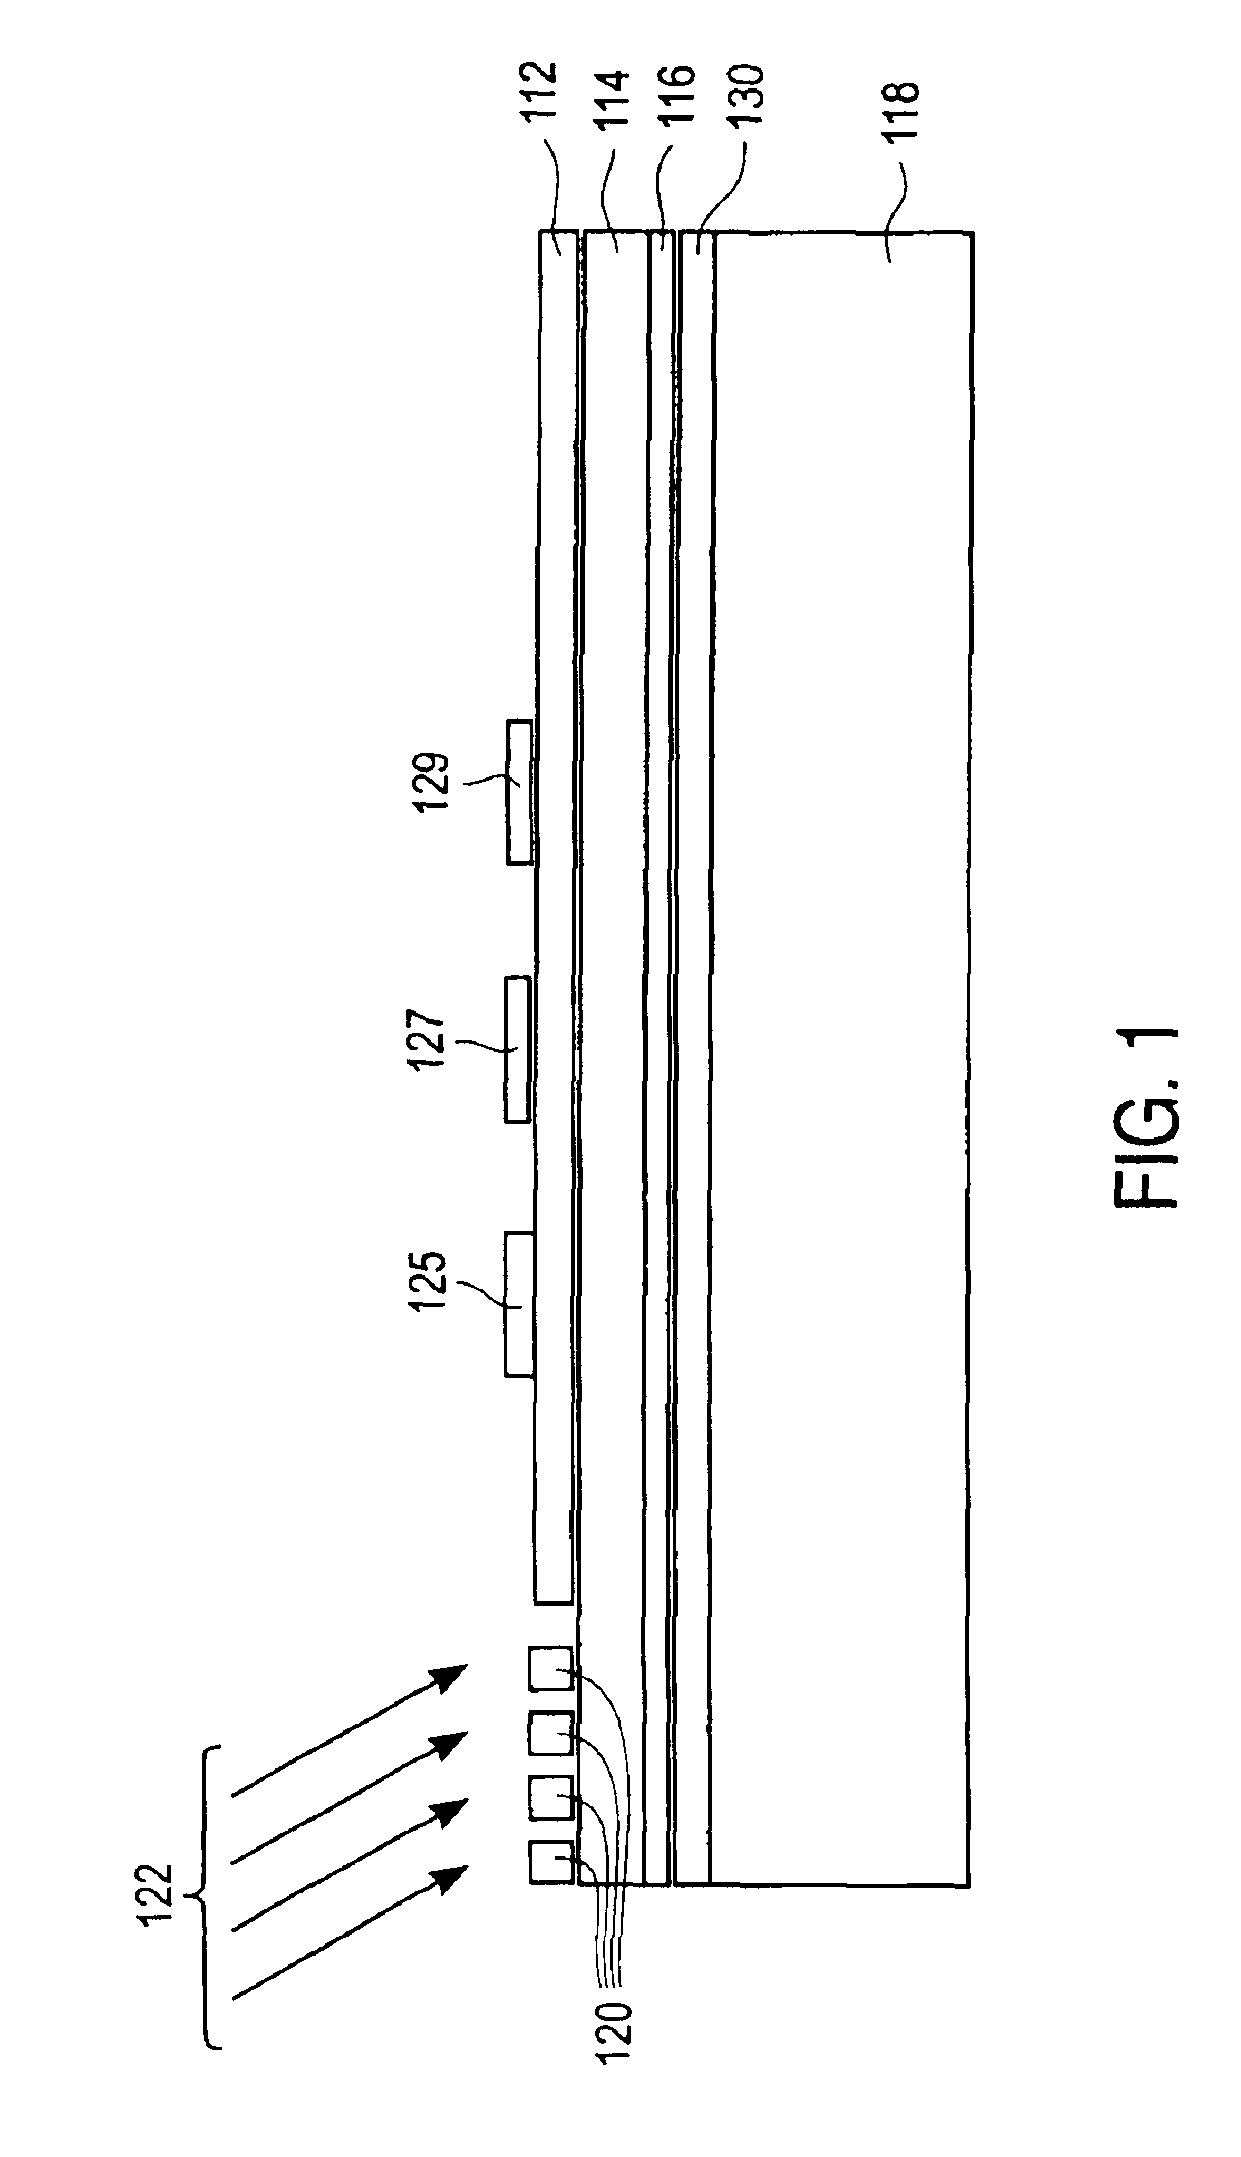 Optical switch fabricated by a thin film process